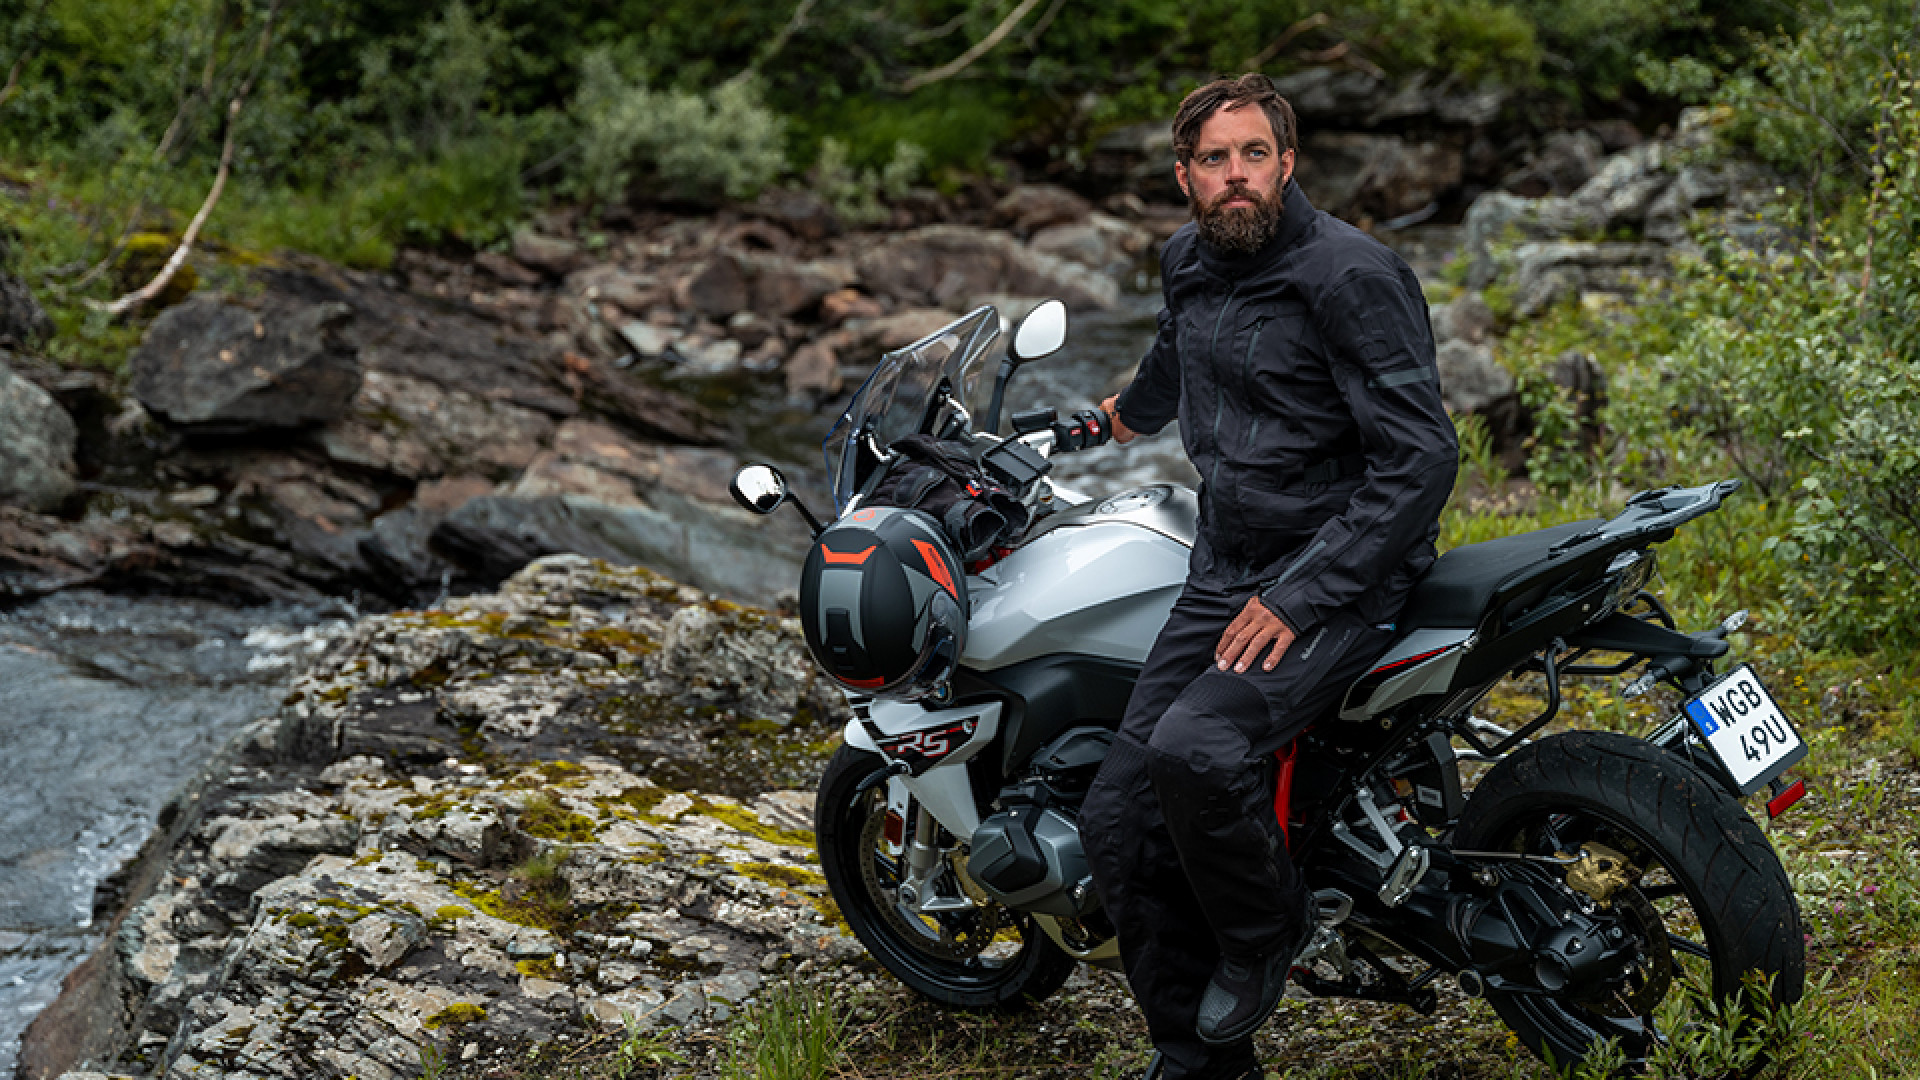 https://www.raceleathers.co.uk/image/cache/catalog/Blog%20Images/Halvarssons%20Gruven%20Motorcycle%20Jacket%20Product%20Review-1920x1080.jpg